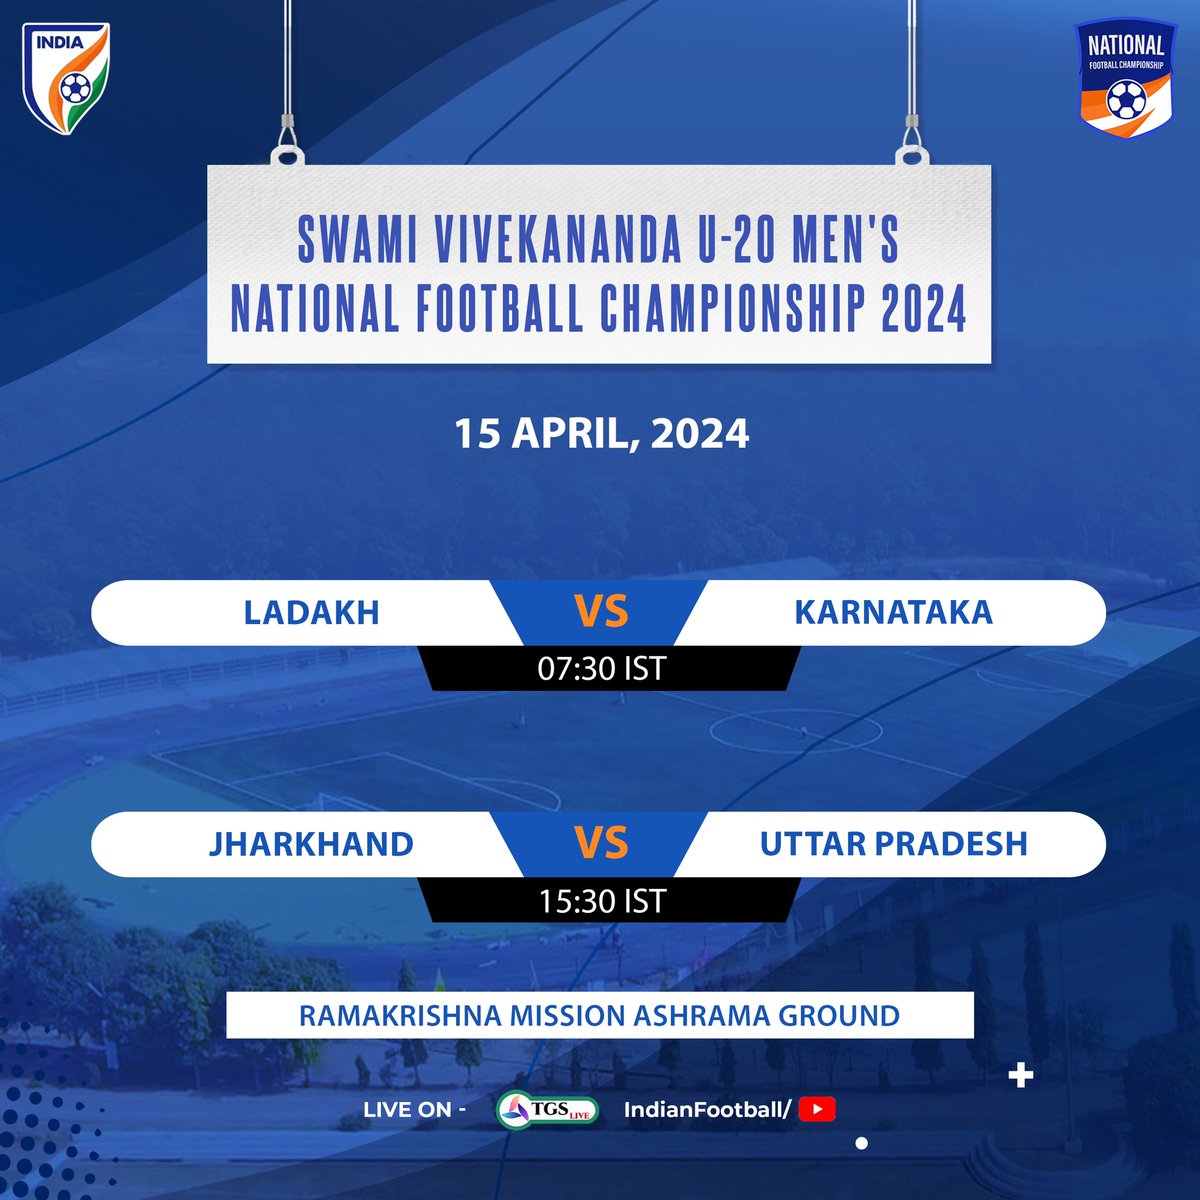 2️⃣ exciting clashes are coming up tomorrow in the Swami Vivekananda U20 Men’s NFC 👀👊🏻 #IndianFootball ⚽️